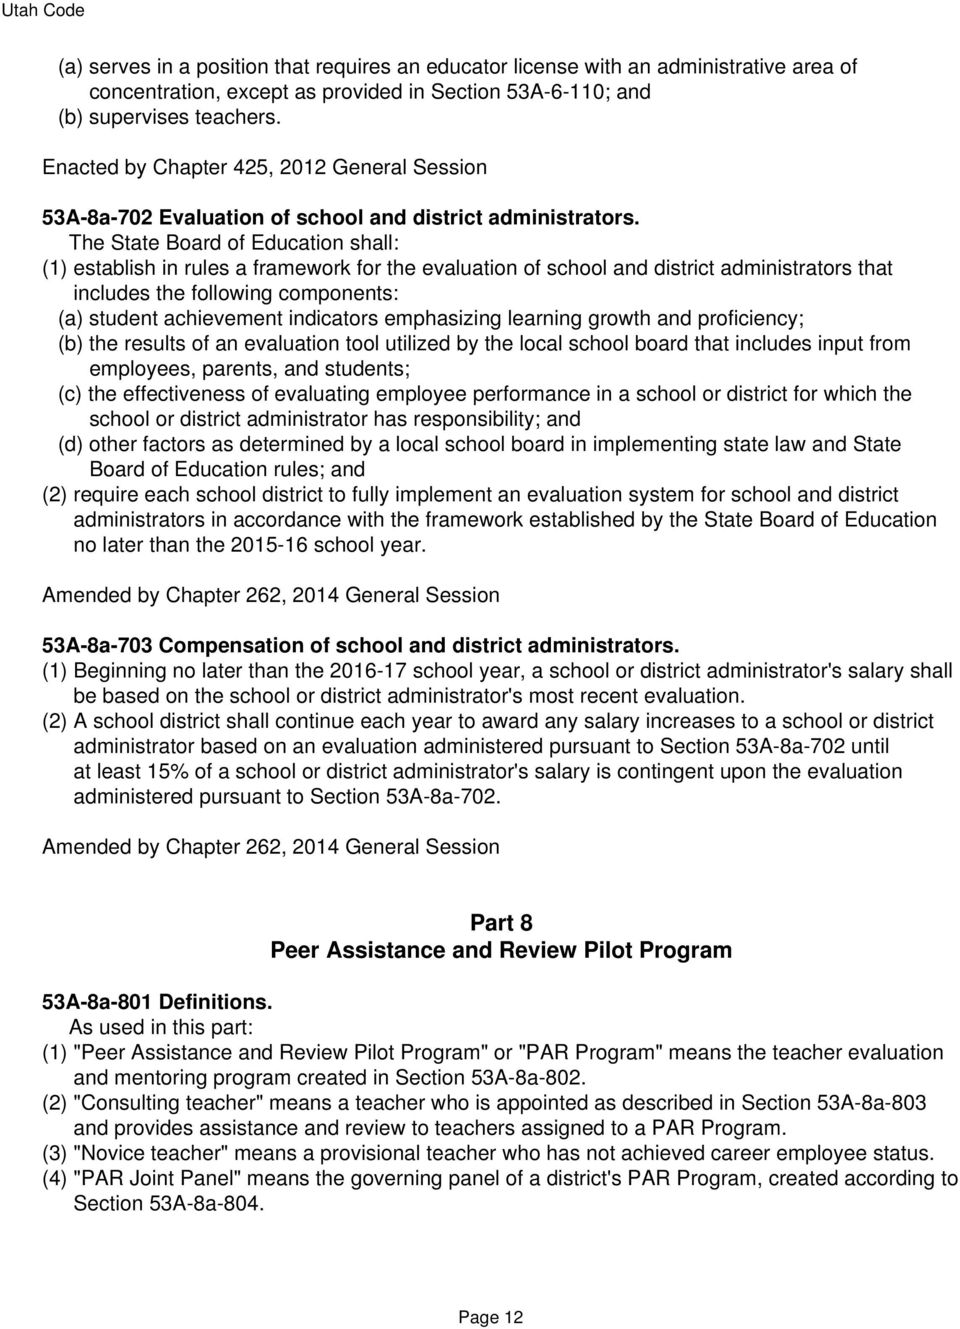 The State Board of Education shall: (1) establish in rules a framework for the evaluation of school and district administrators that includes the following components: (a) student achievement